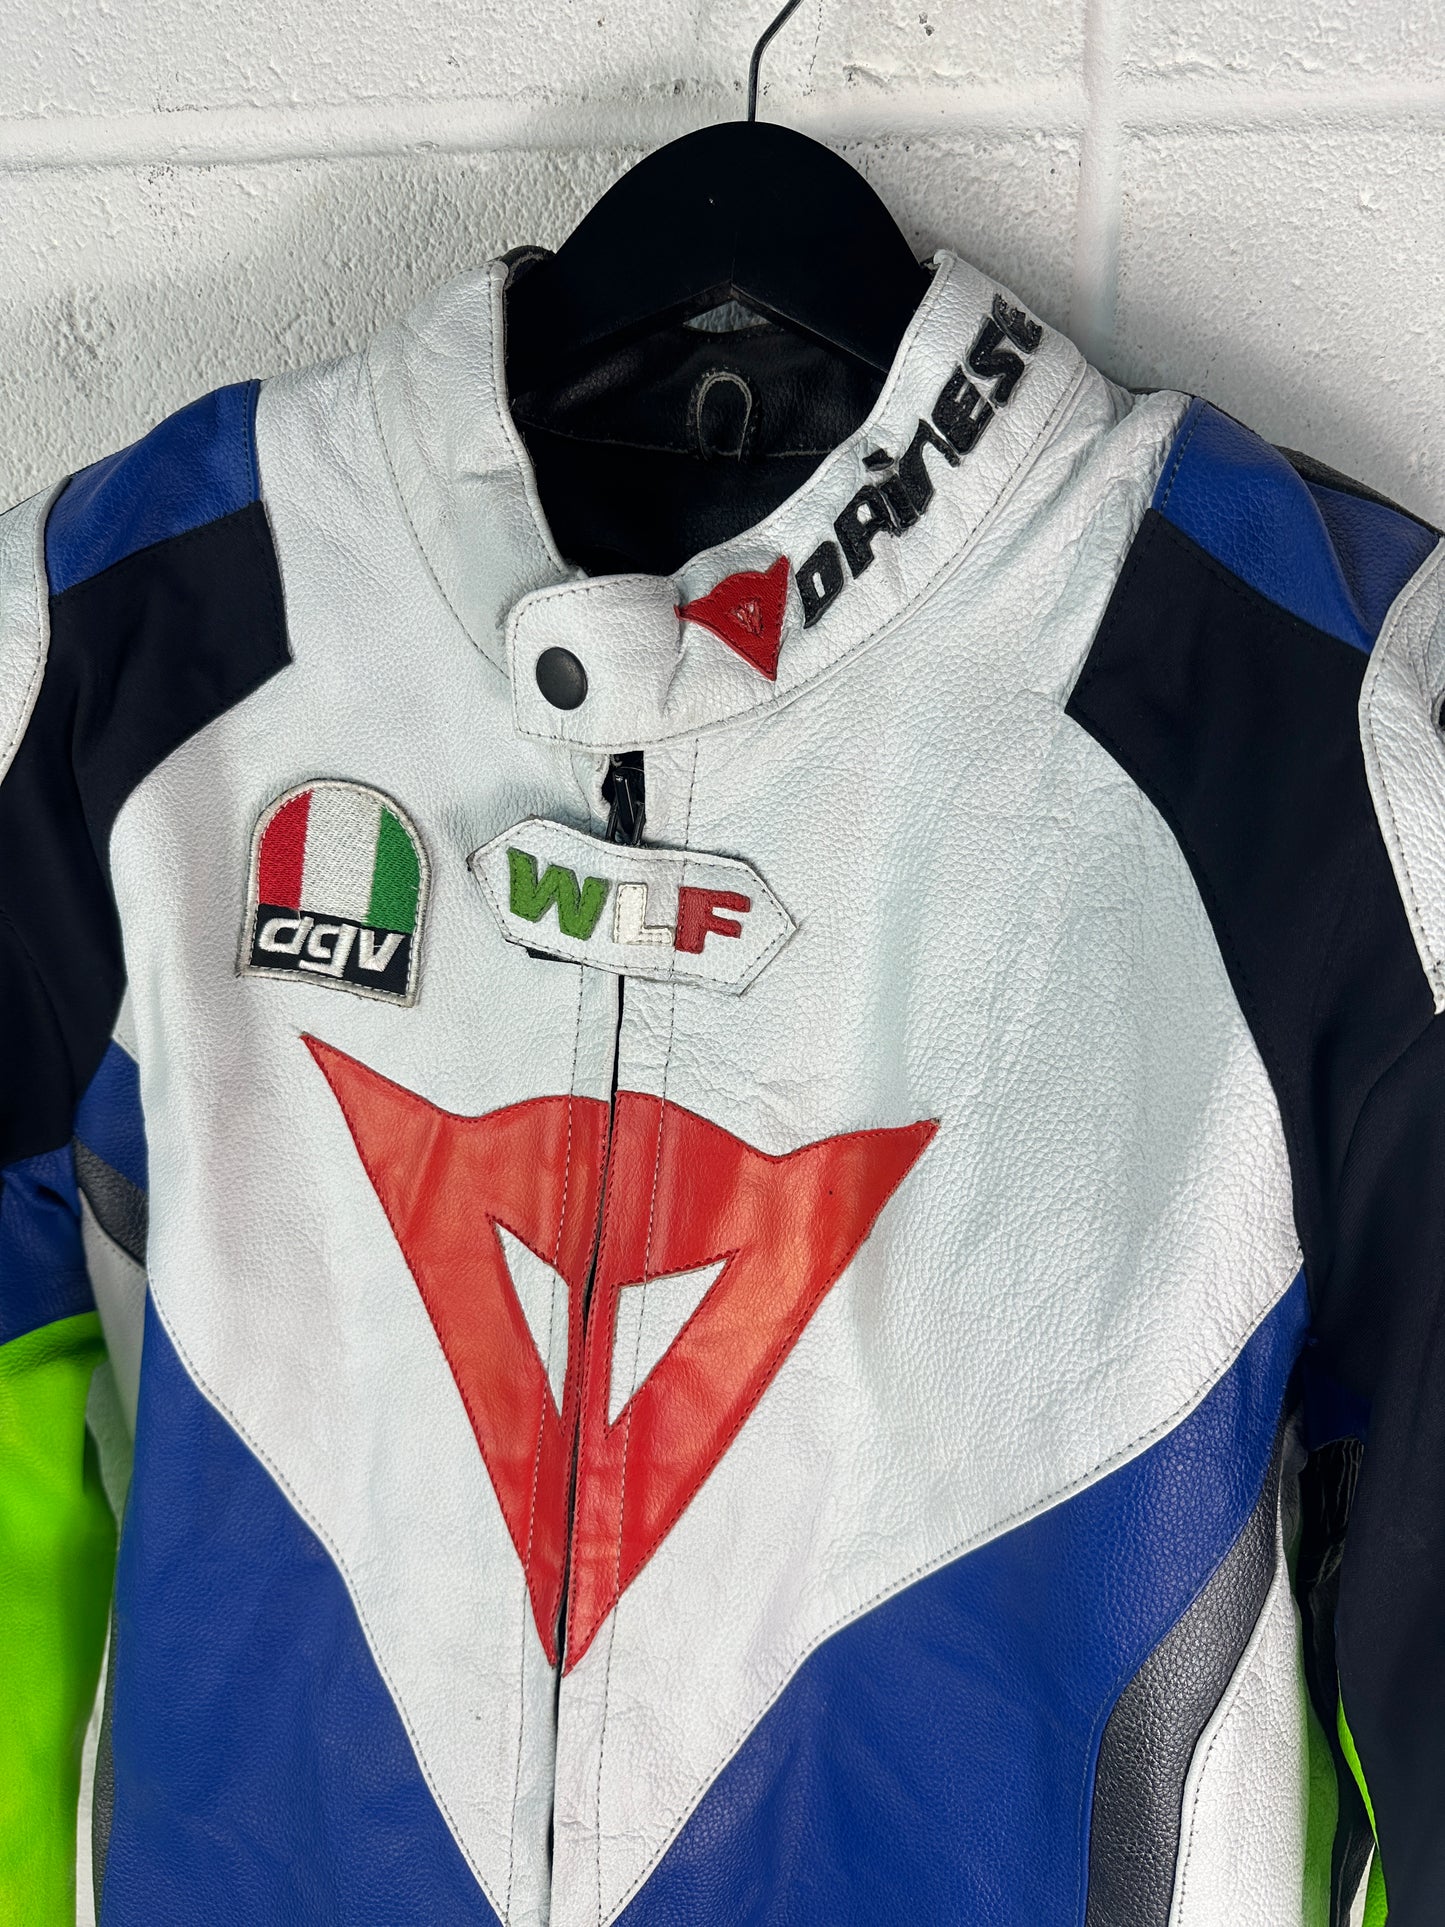 Load image into Gallery viewer, Dainese Avro 4 VR46 Leather Armored Motorcycle Racing Jacket Sz Med
